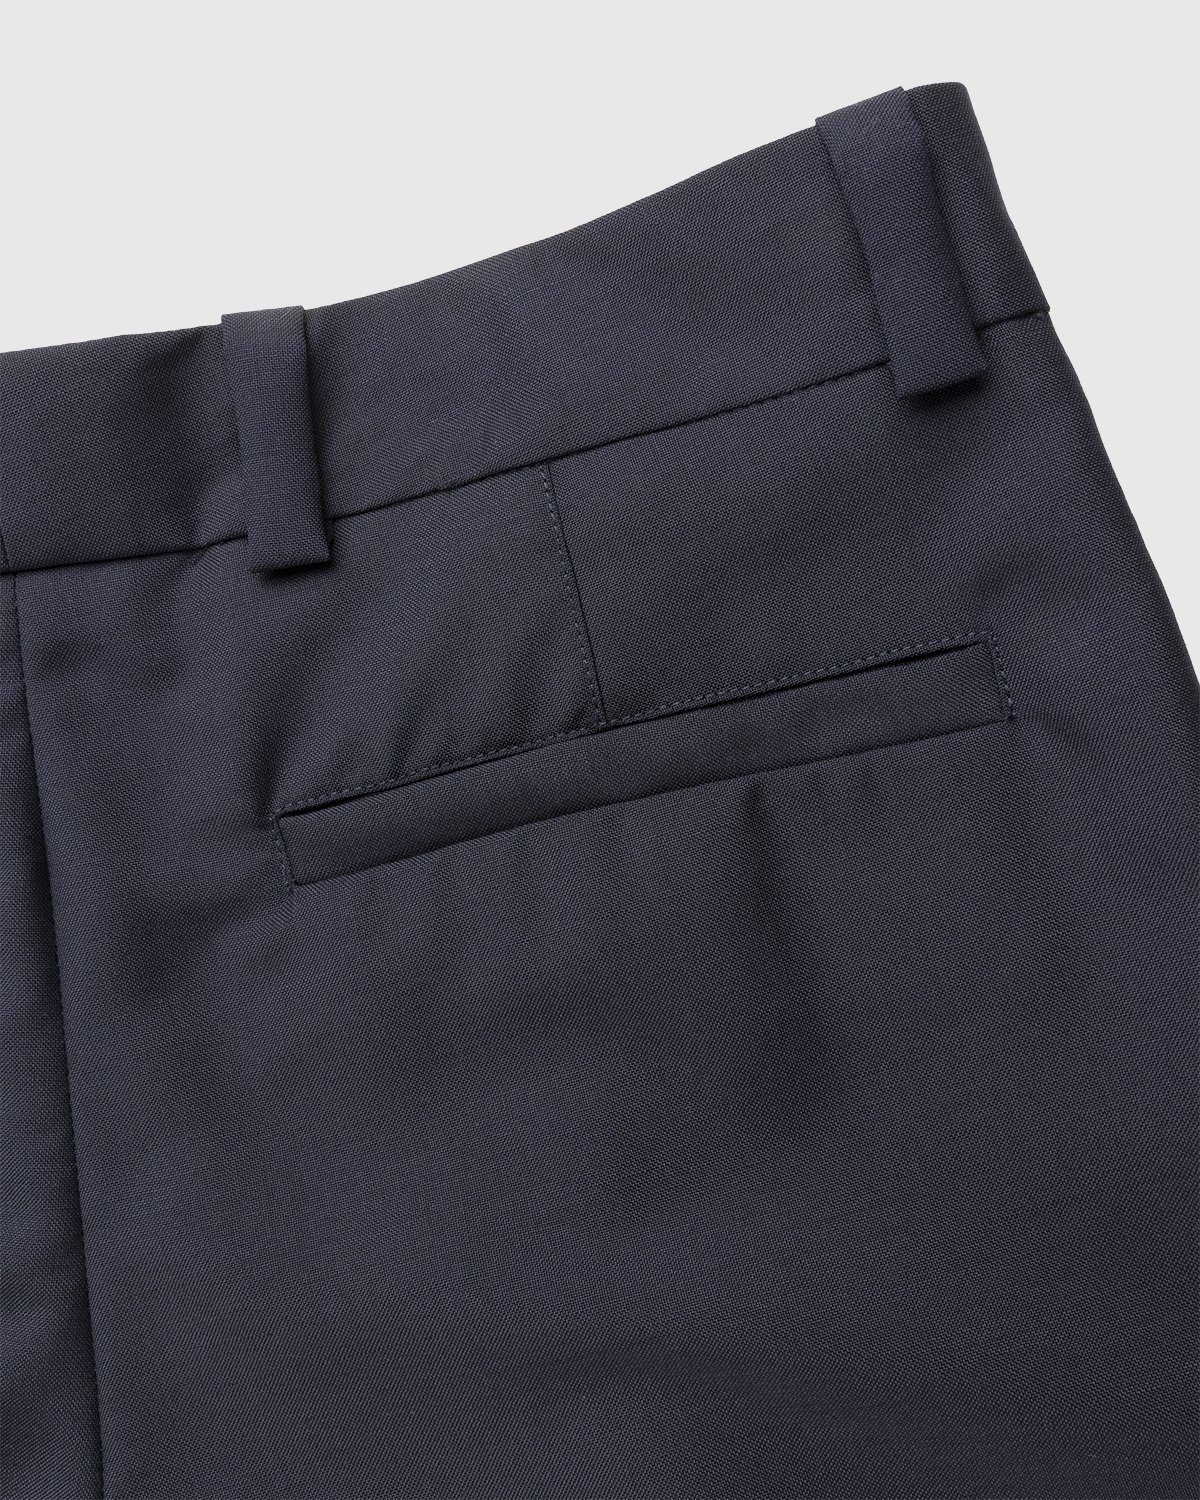 Acne Studios – Mohair Pleated Trousers Navy - Pants - Blue - Image 3